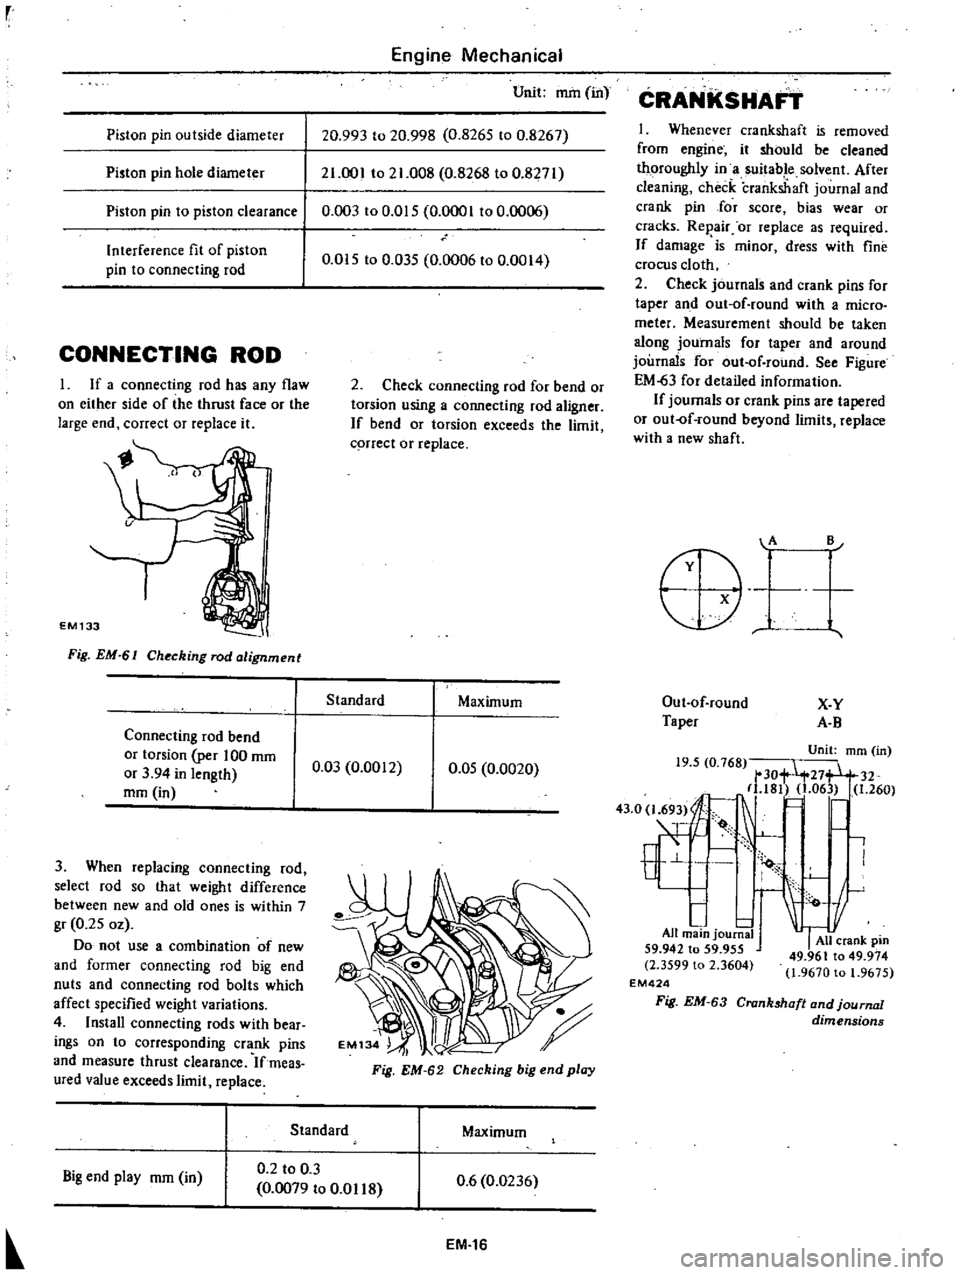 DATSUN PICK-UP 1977  Service Manual 
r

Piston

pin 
outside 
diameter

Piston

pin 
hole 
diameter

Piston

pin 
to

piston 
clearance

I

Interference 
fit 
of

piston

pin 
to

connecting 
rod

CONNECTING

ROD

I 
If 
a

connecting 
